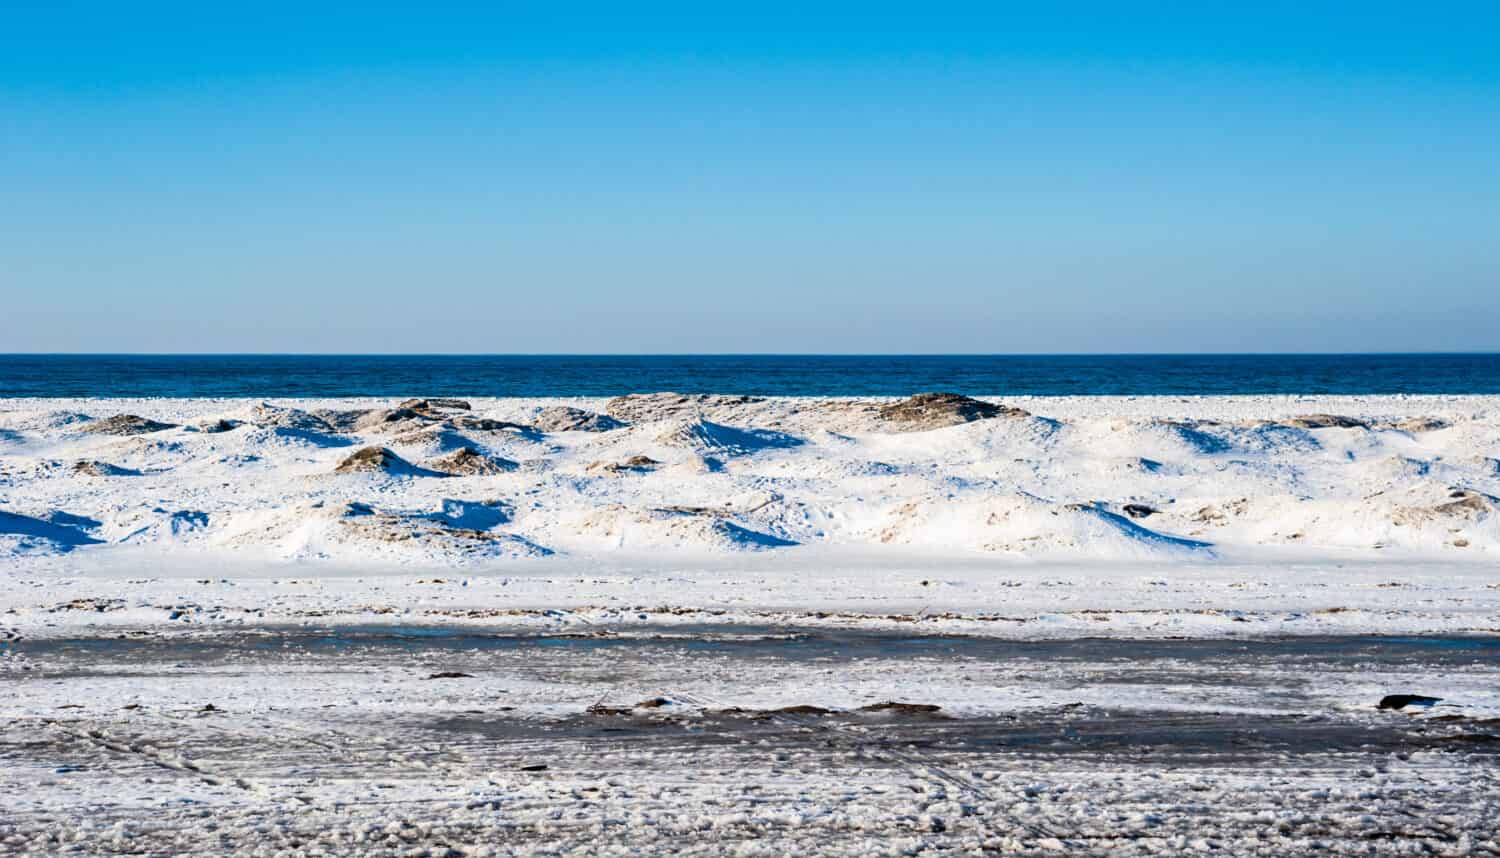 Frozen ice and sand dunes on beach in winter by empty lake horizon under clear blue sky, near Georgian Bay, Ontario, Canada.